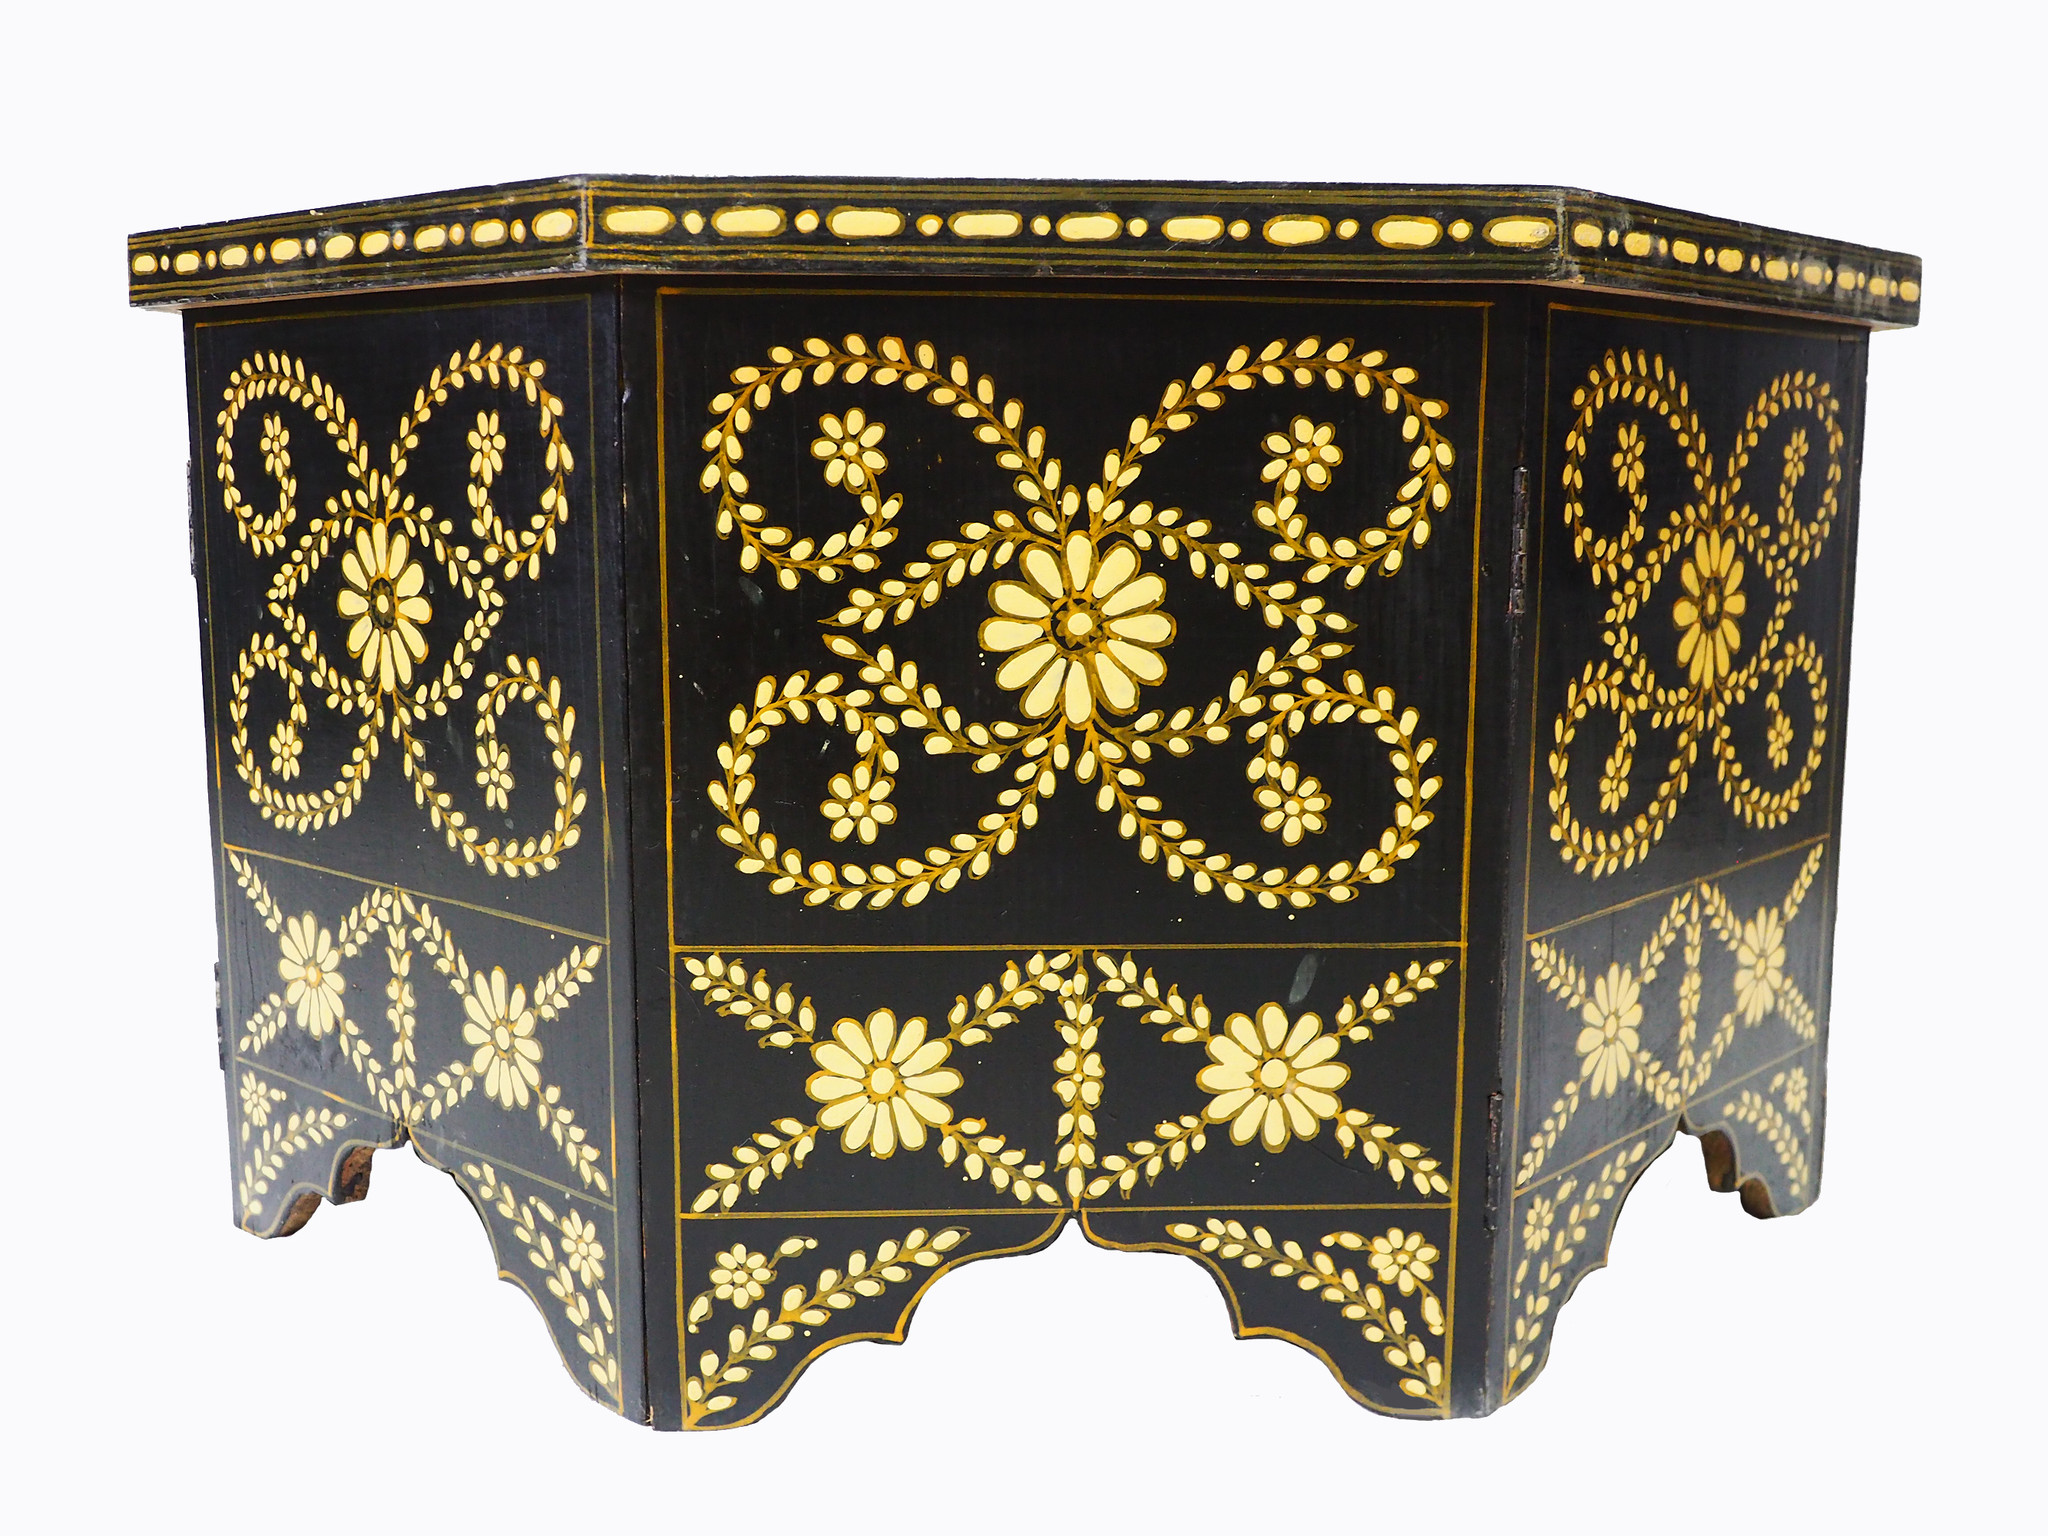 80x80 cm cm antique-look orient colonial solid wood hand painted  table Coffee Table living room table  from Afghanistan No:A